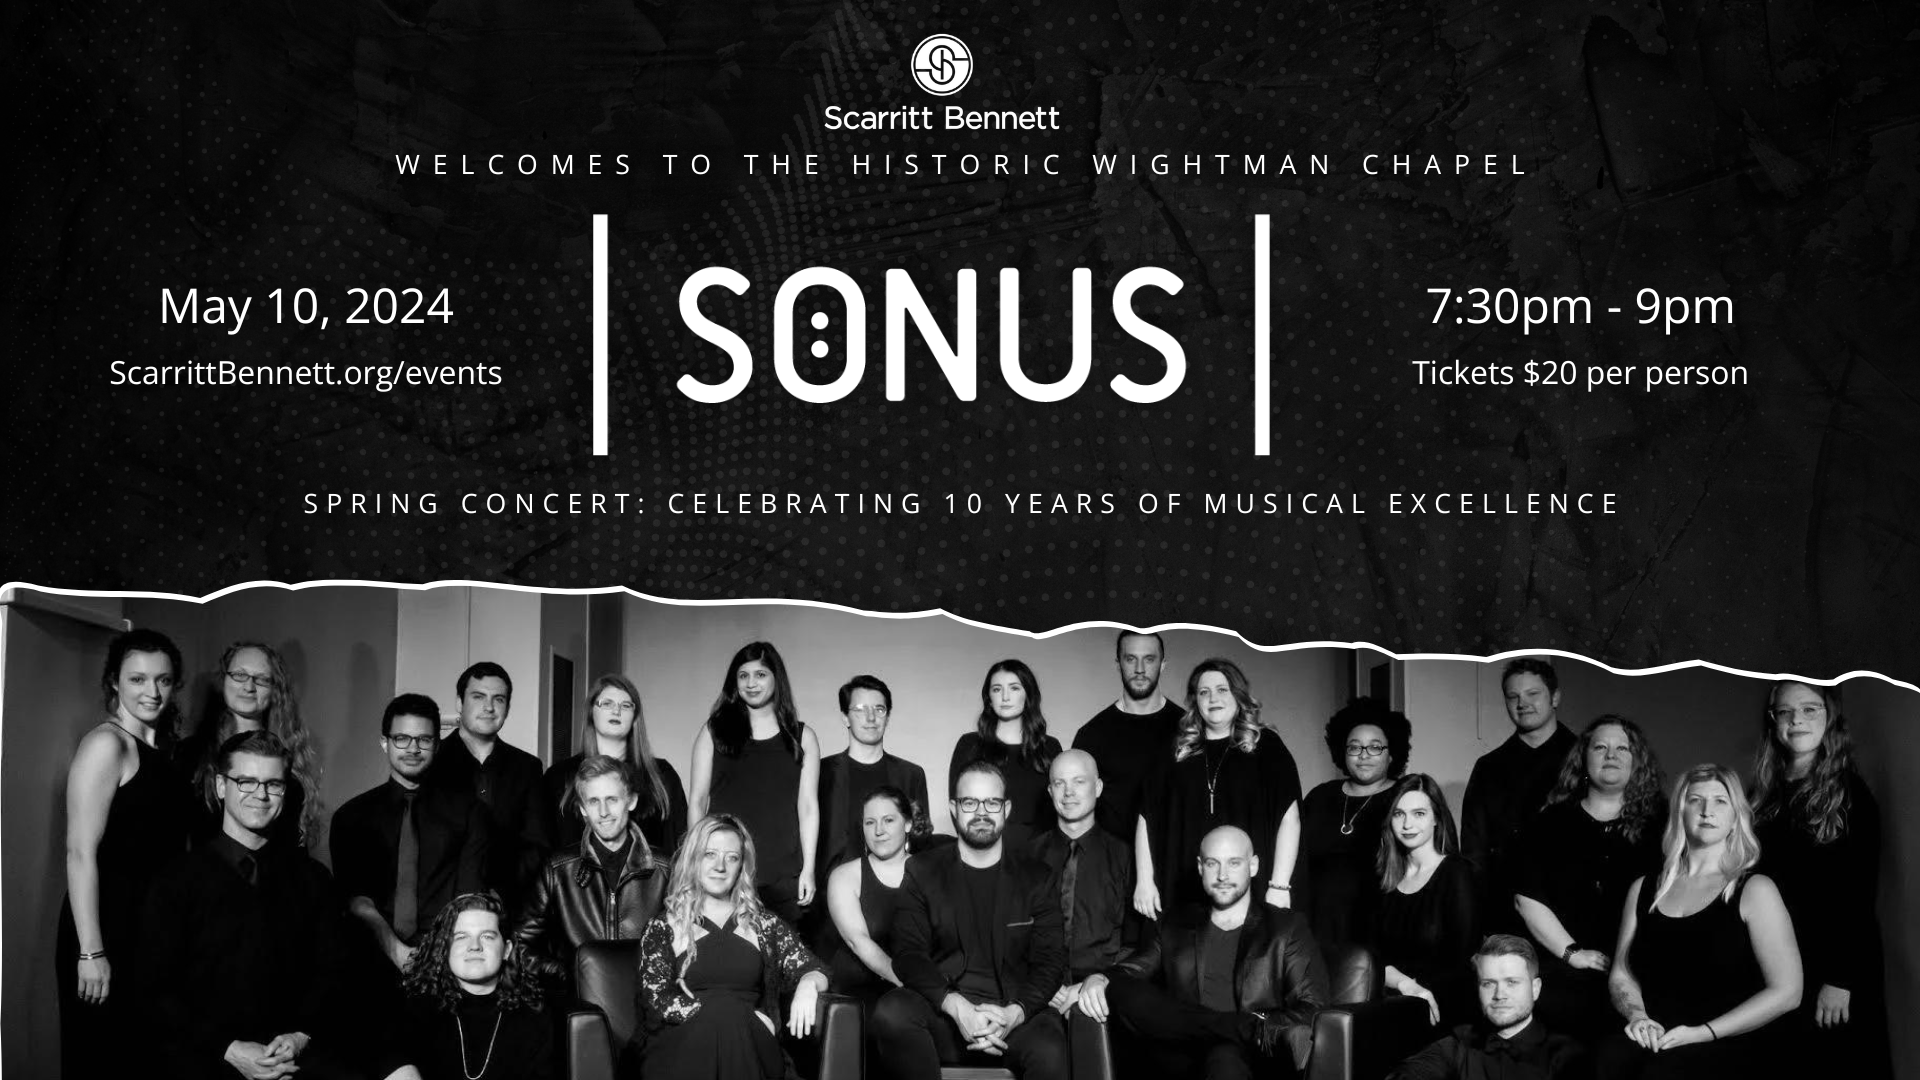 SONUS Choir Spring Concert in Wightman Chapel at 7:30pm until 9:00pm tickets $20